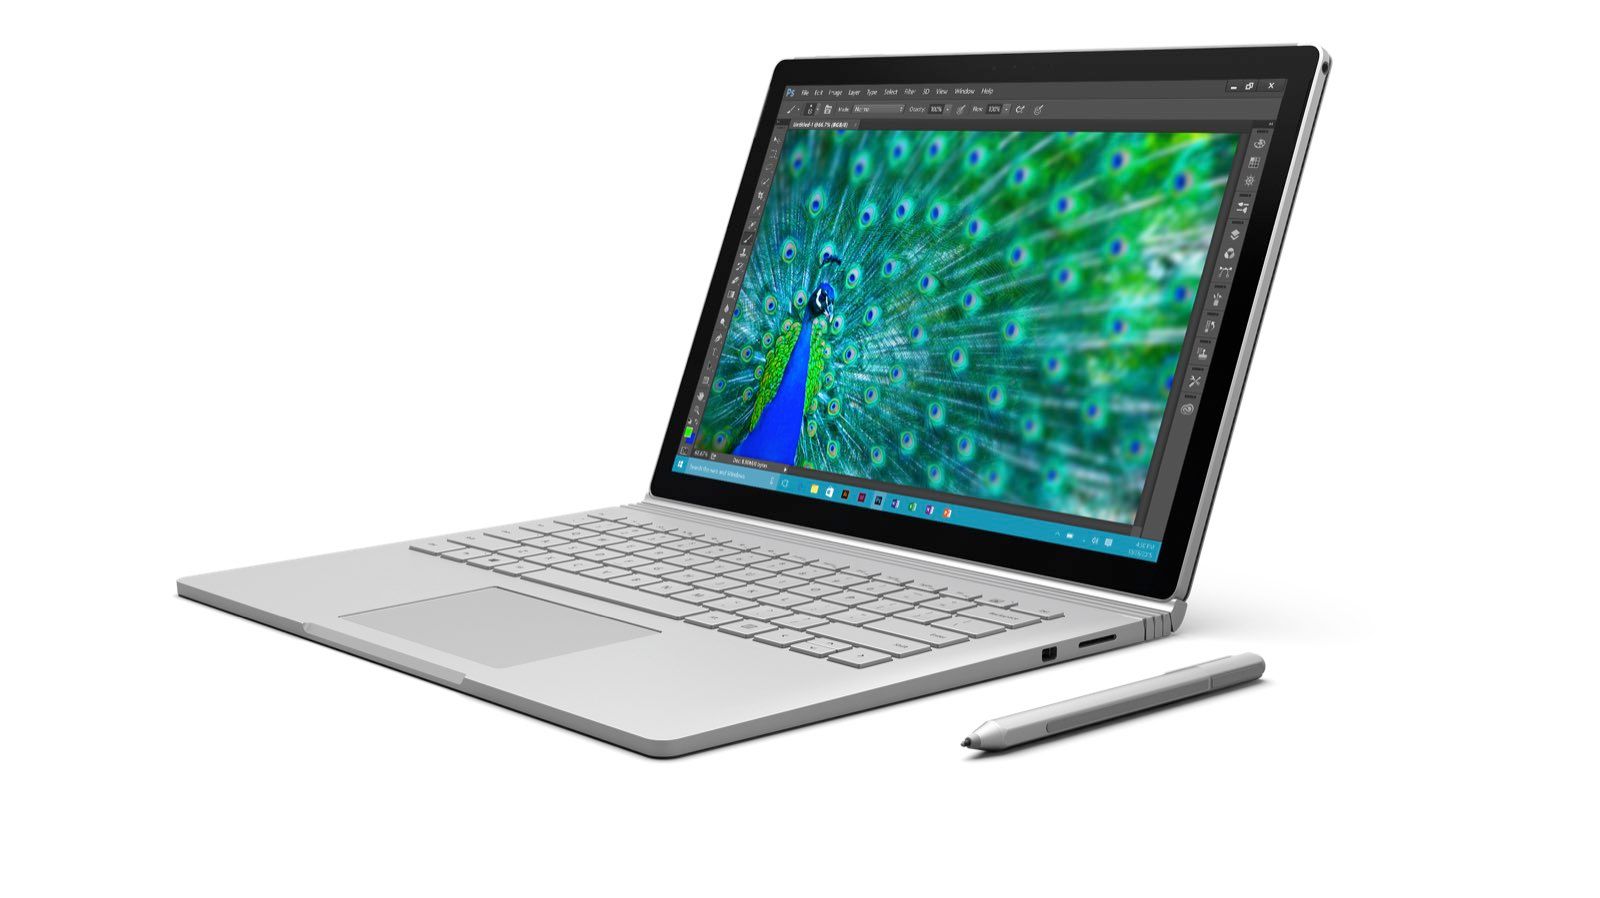 microsoft surface book out now buy it today in the uk price from 1300 image 1